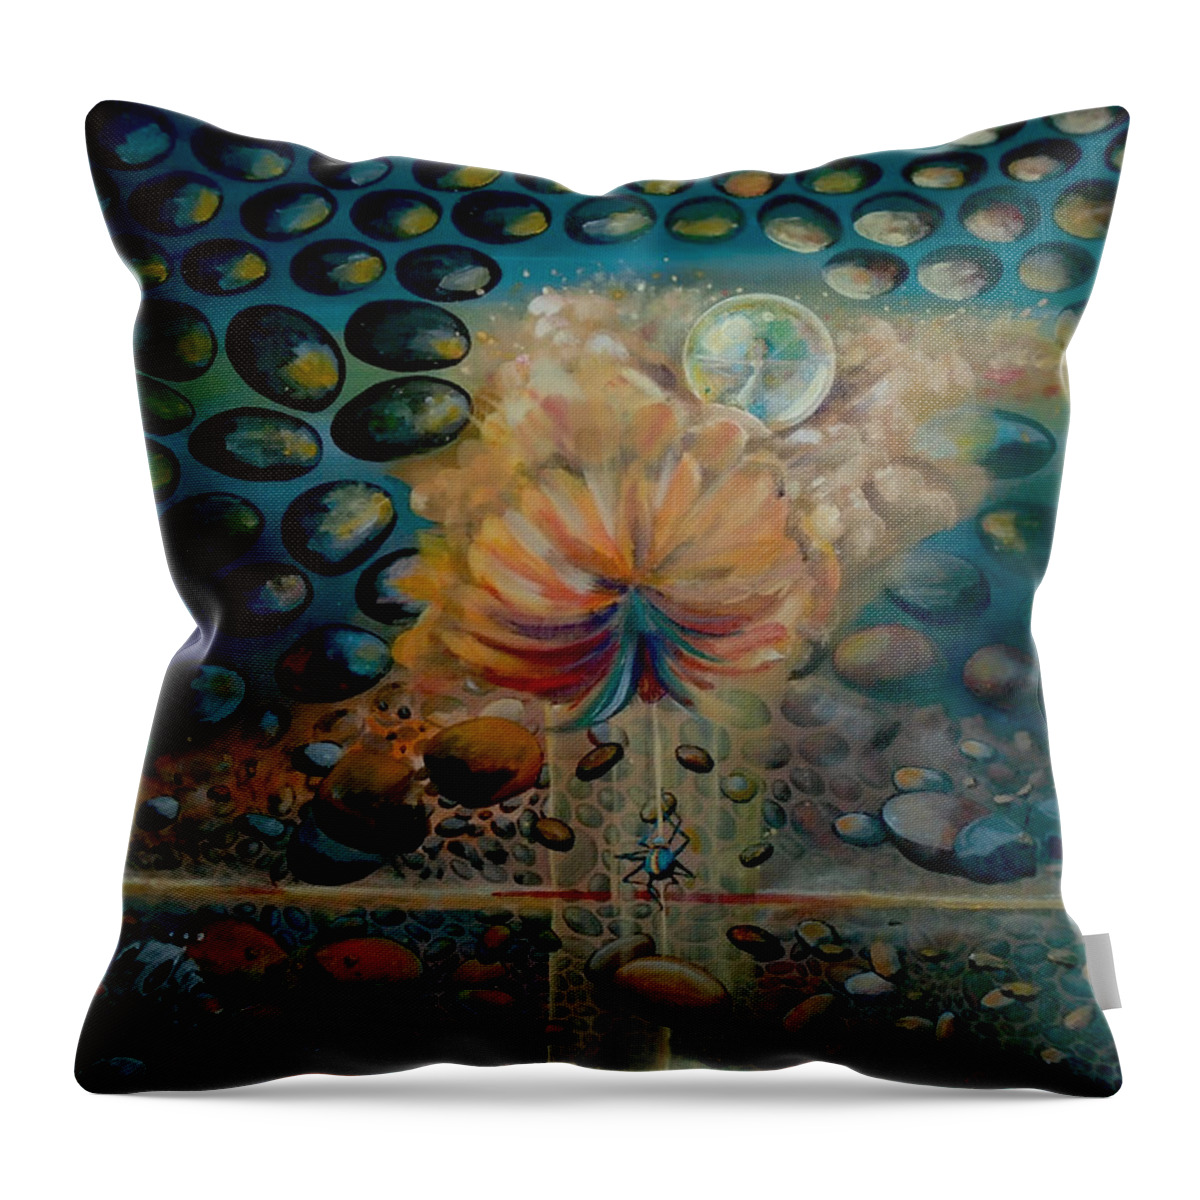 Pop-surrealism Throw Pillow featuring the painting The Itsy Bitsy Spider by Mindy Huntress